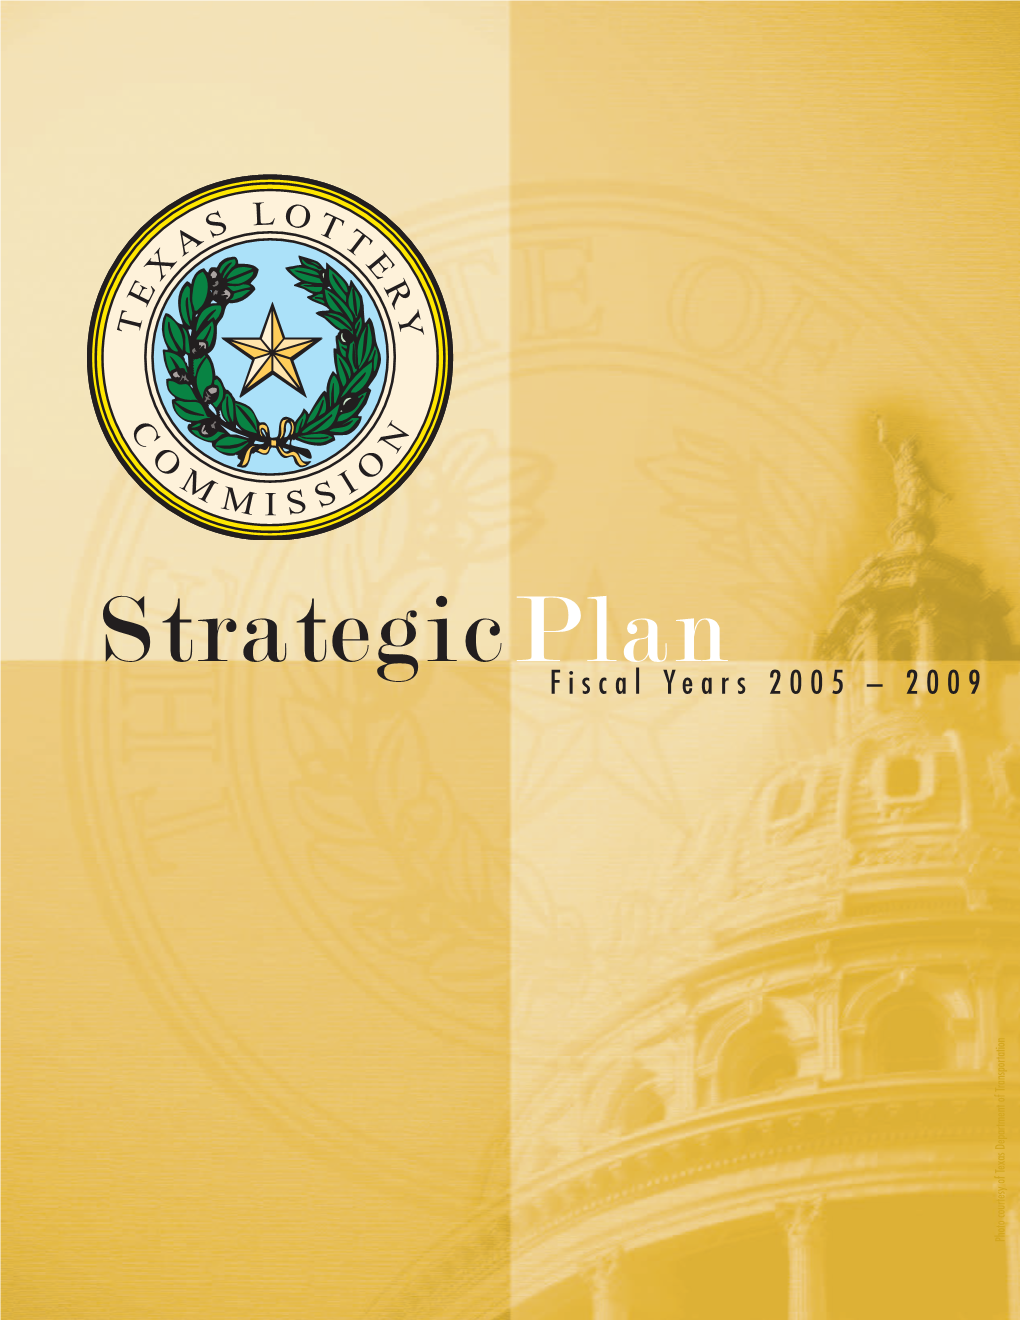 Strategicplan Fiscal Years 2005 – 2009 Tation Ranspor Tment of T Exas Depar Tesy of T Photo Cour